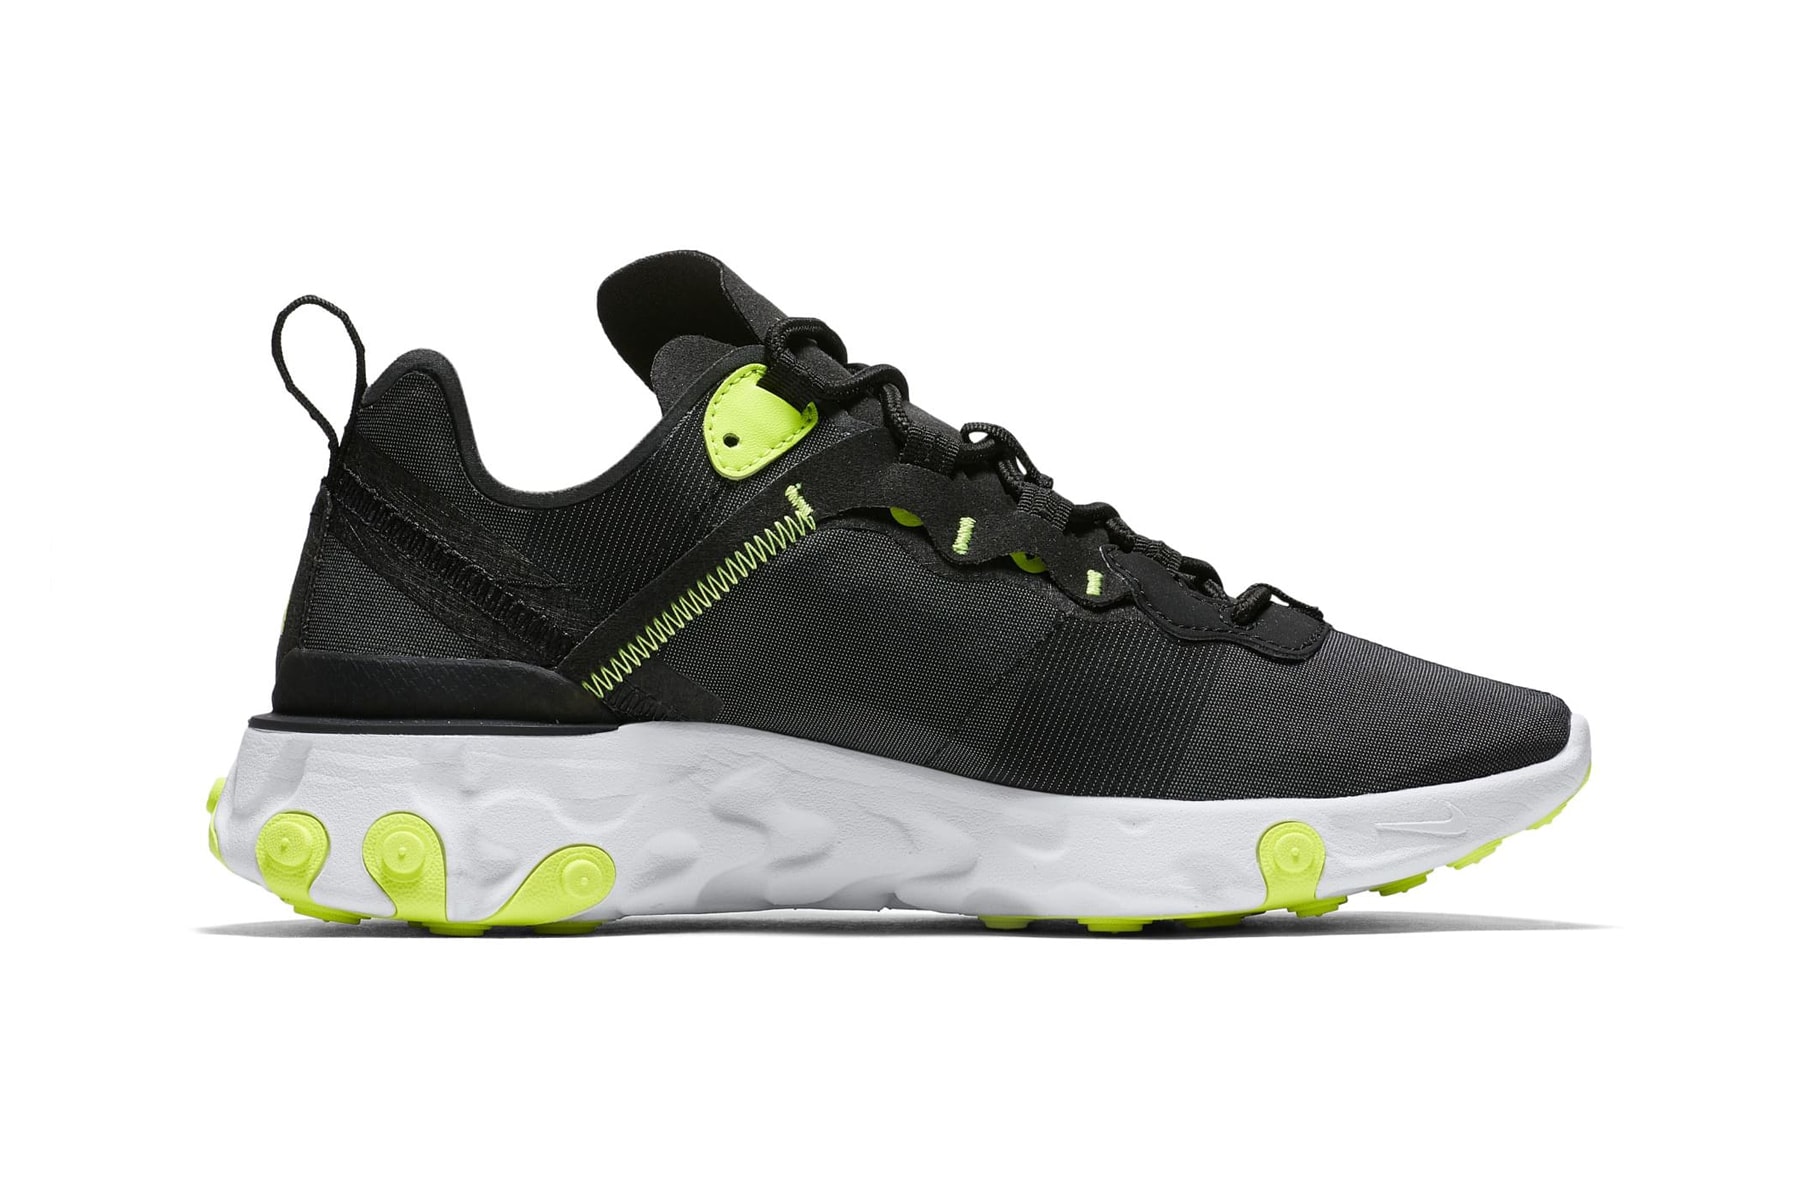 nike react element 55 first look colorways Black Cool Grey White Volt